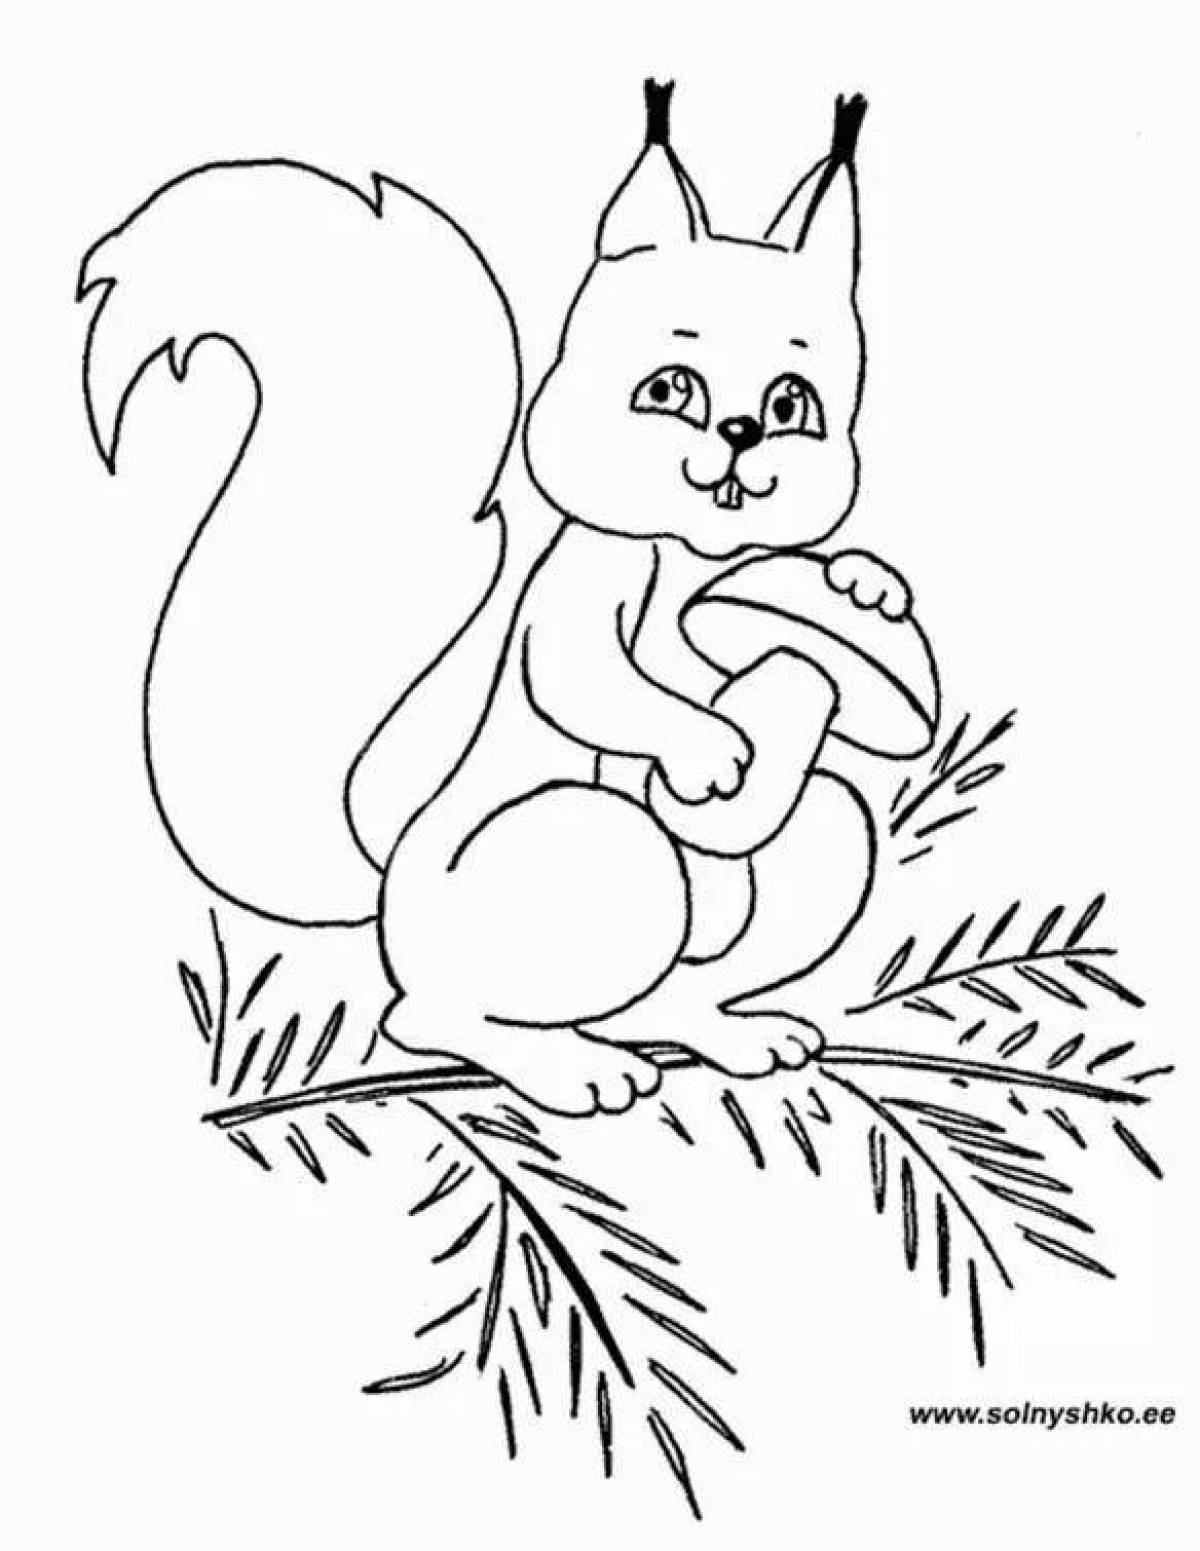 Coloring page energetic squirrel